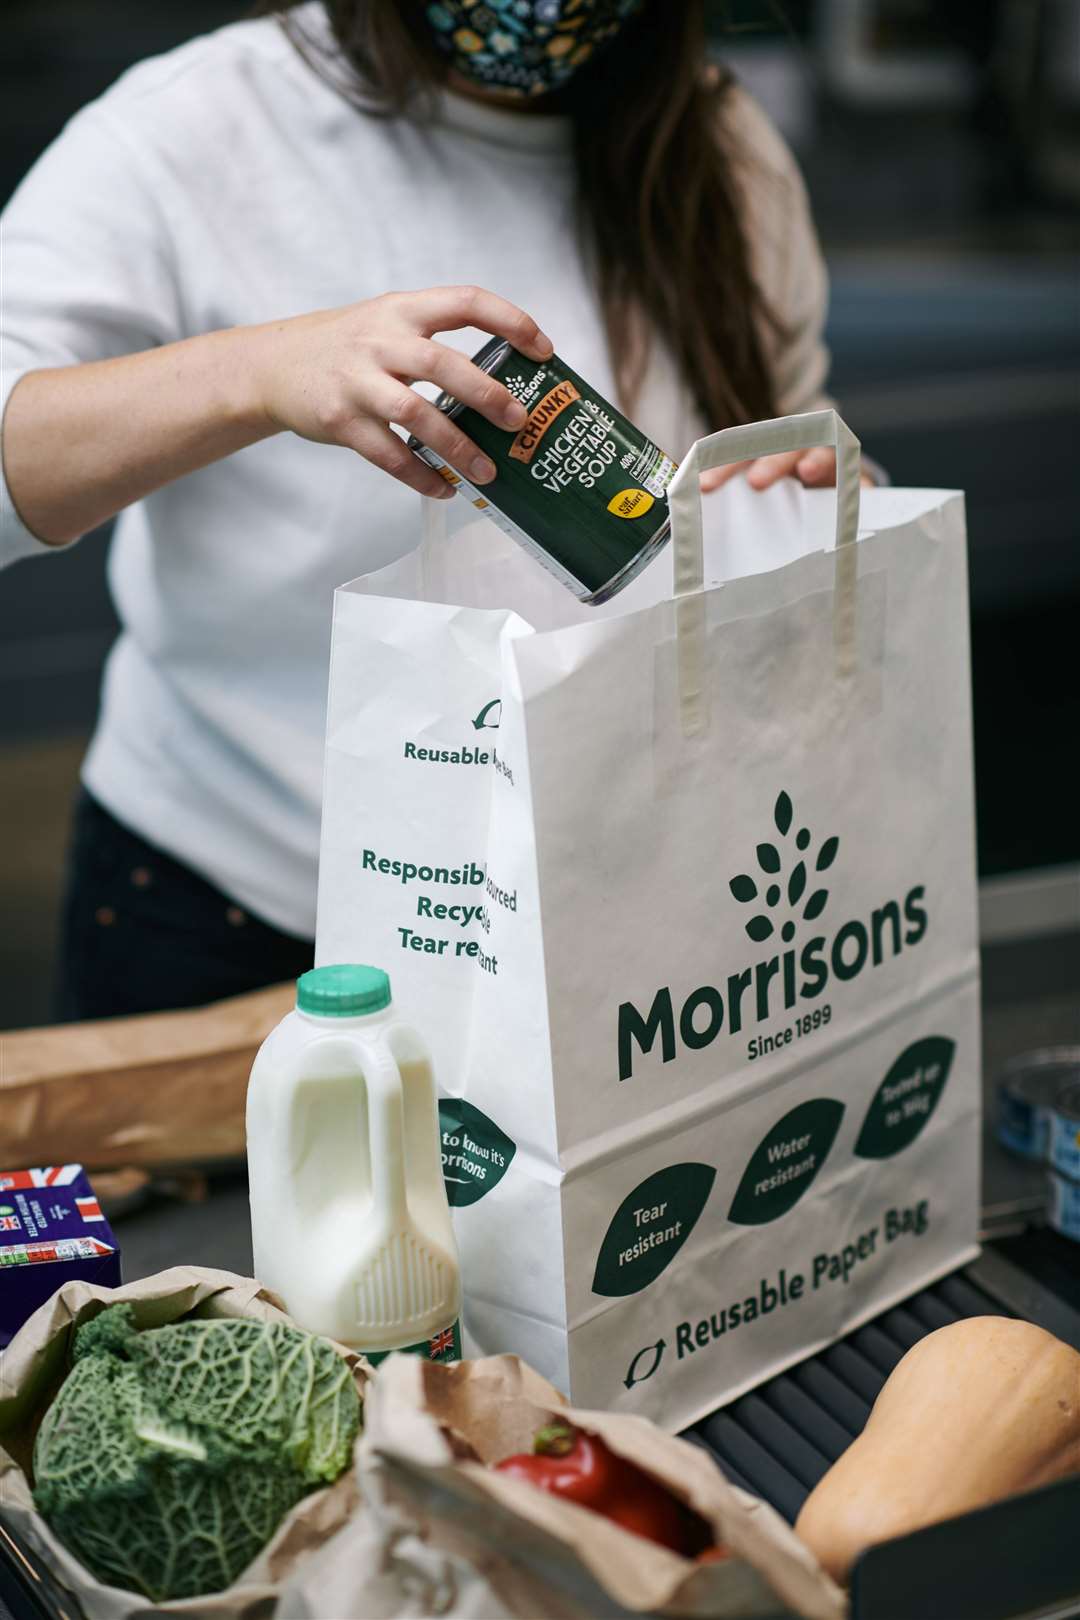 Morrisons has said customers will be able to buy 30p paper bags (Morrisons/PA)